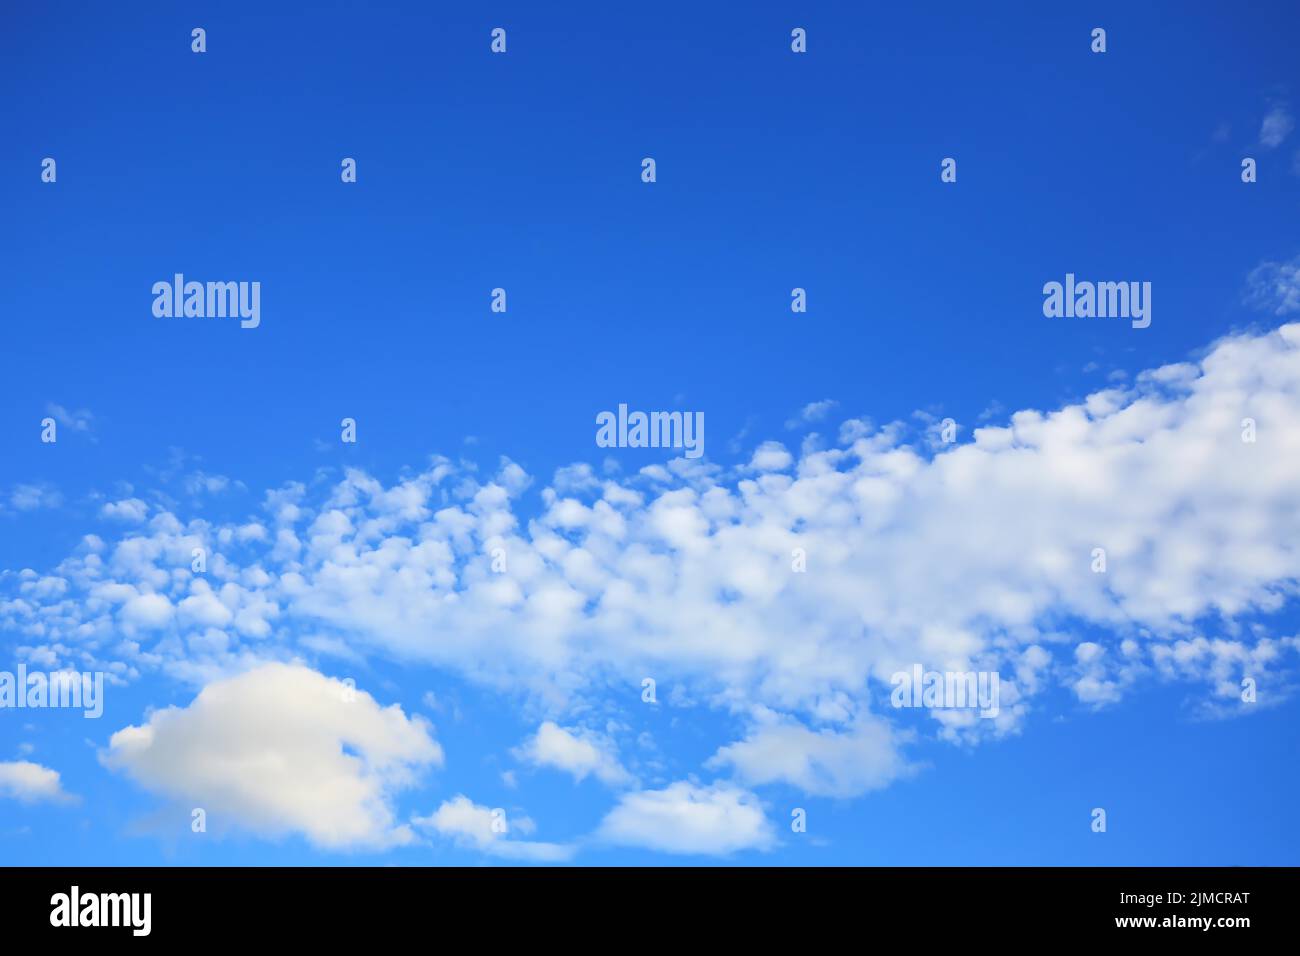 White clouds with a blue sky Stock Photo